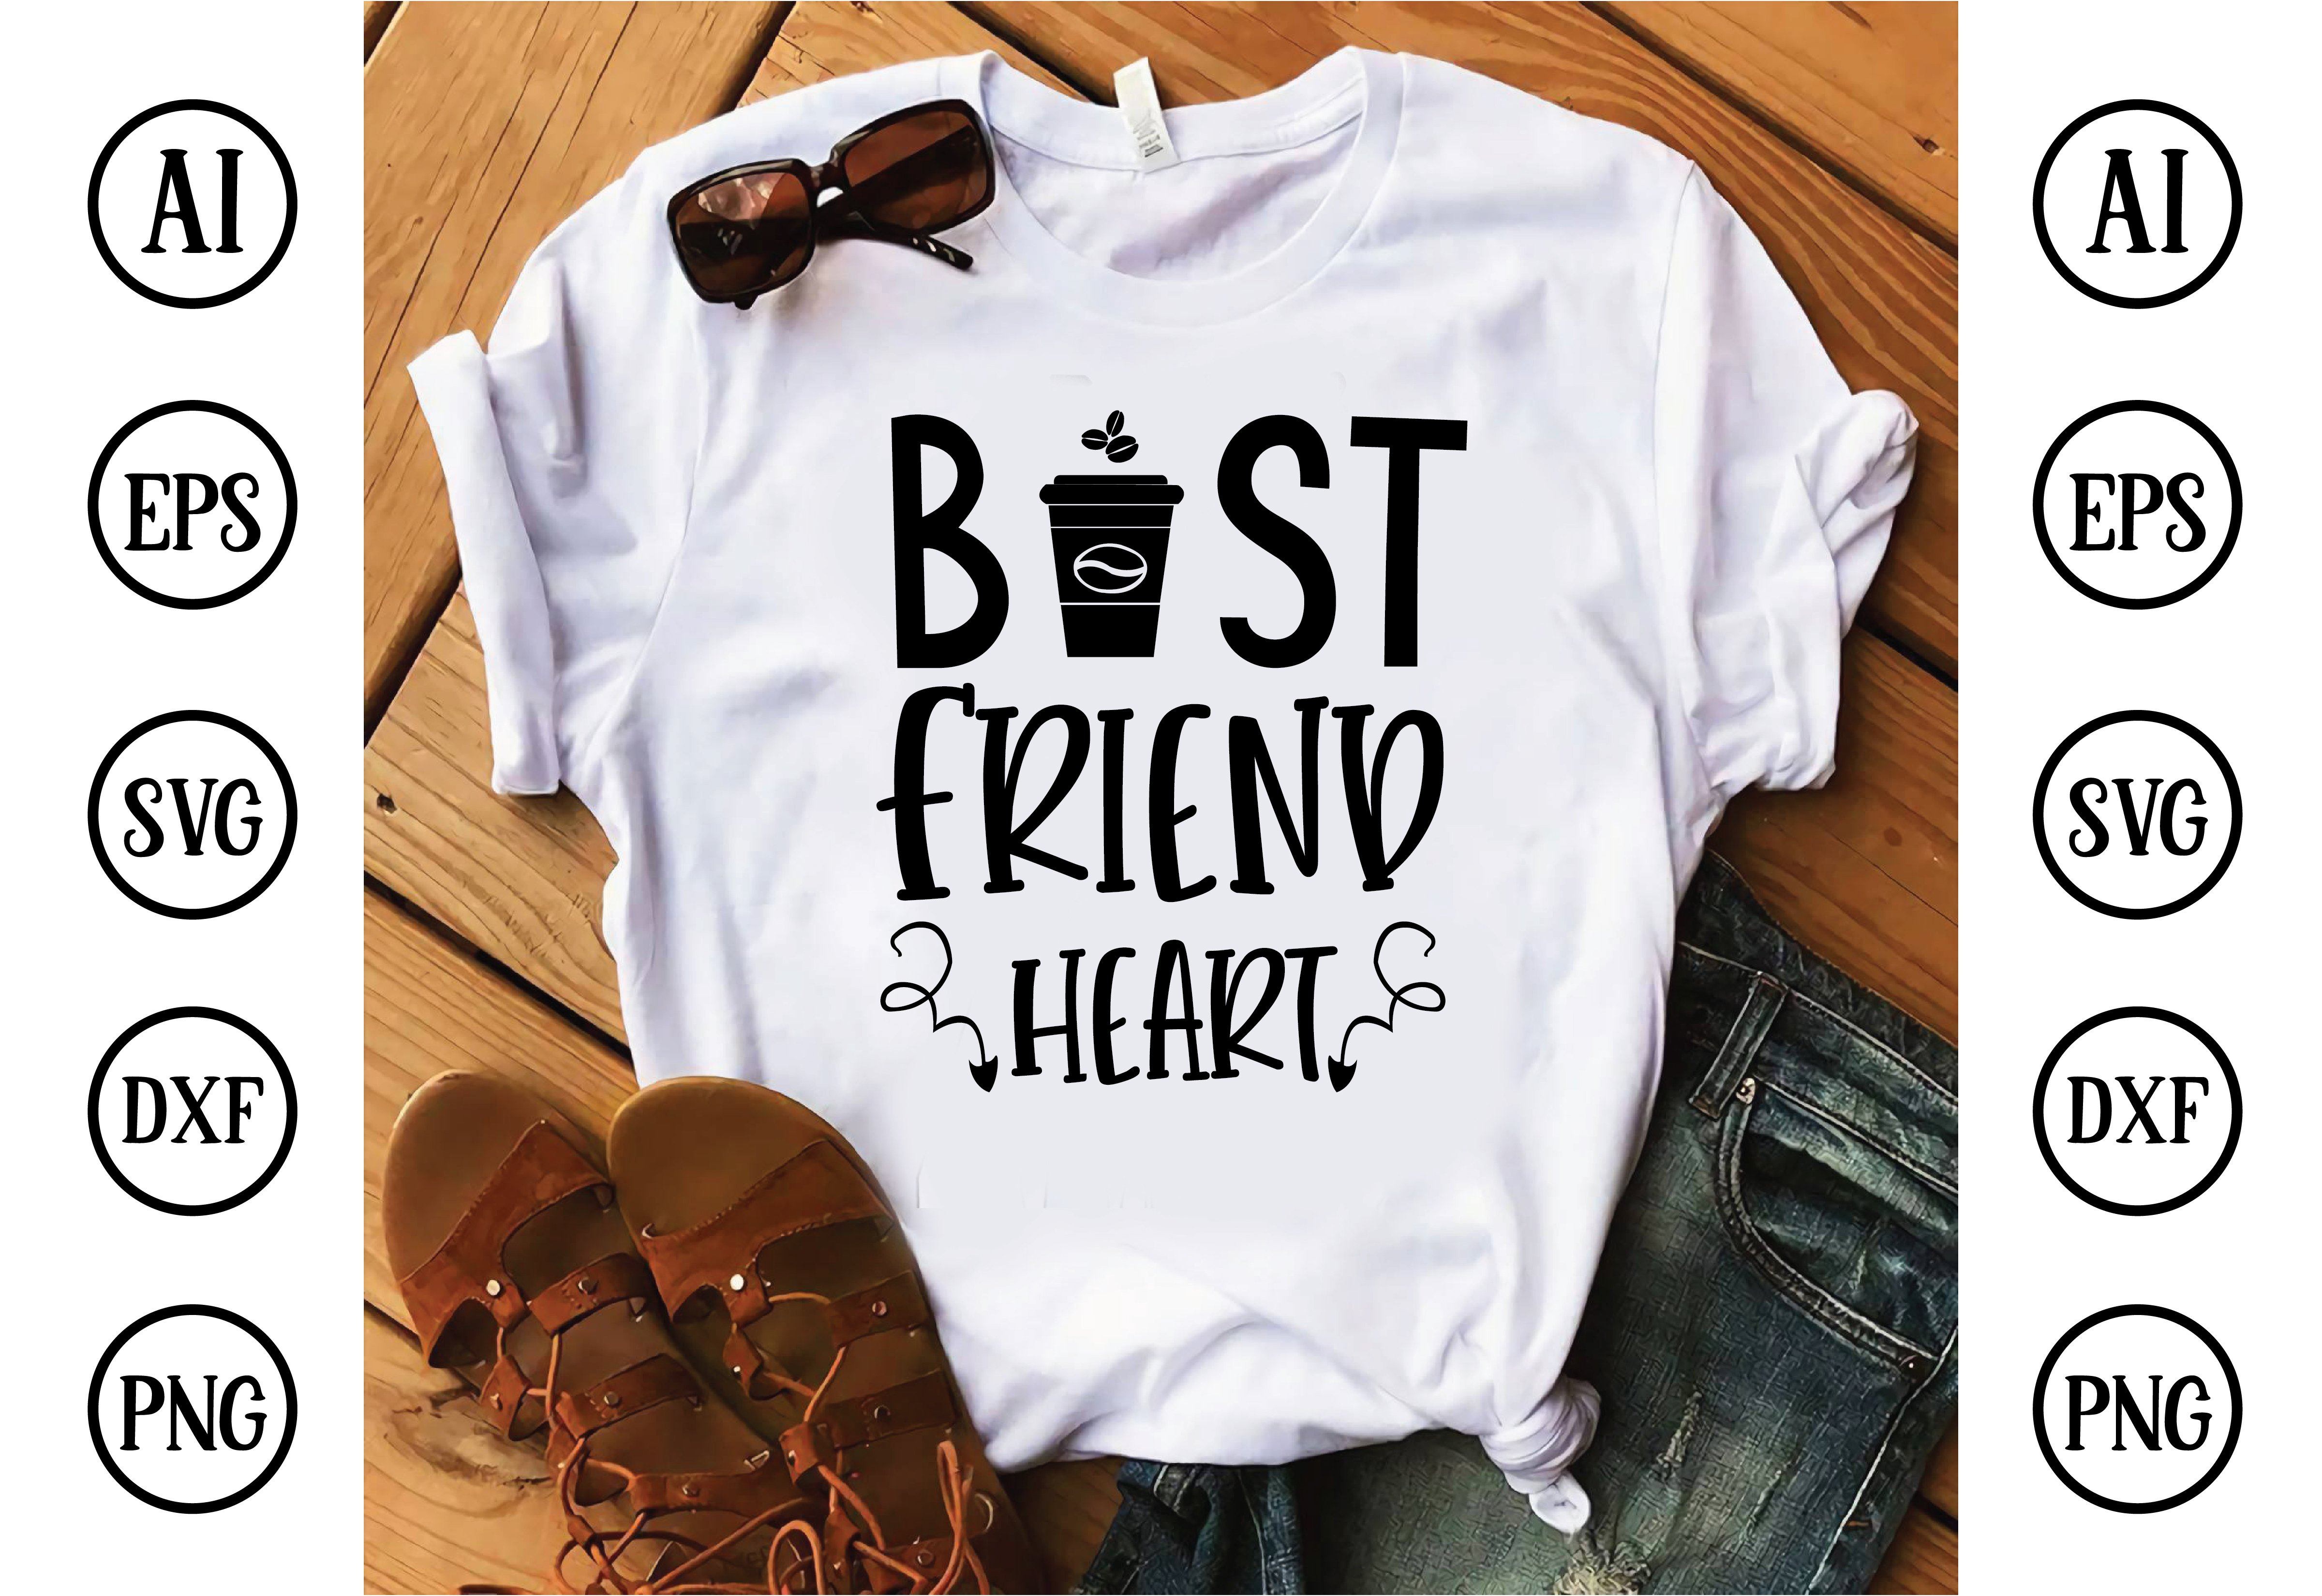 Download Best Friend Heart Svg Design Cut Files For Cutting Machines Like Cricut And Silhouette So Fontsy